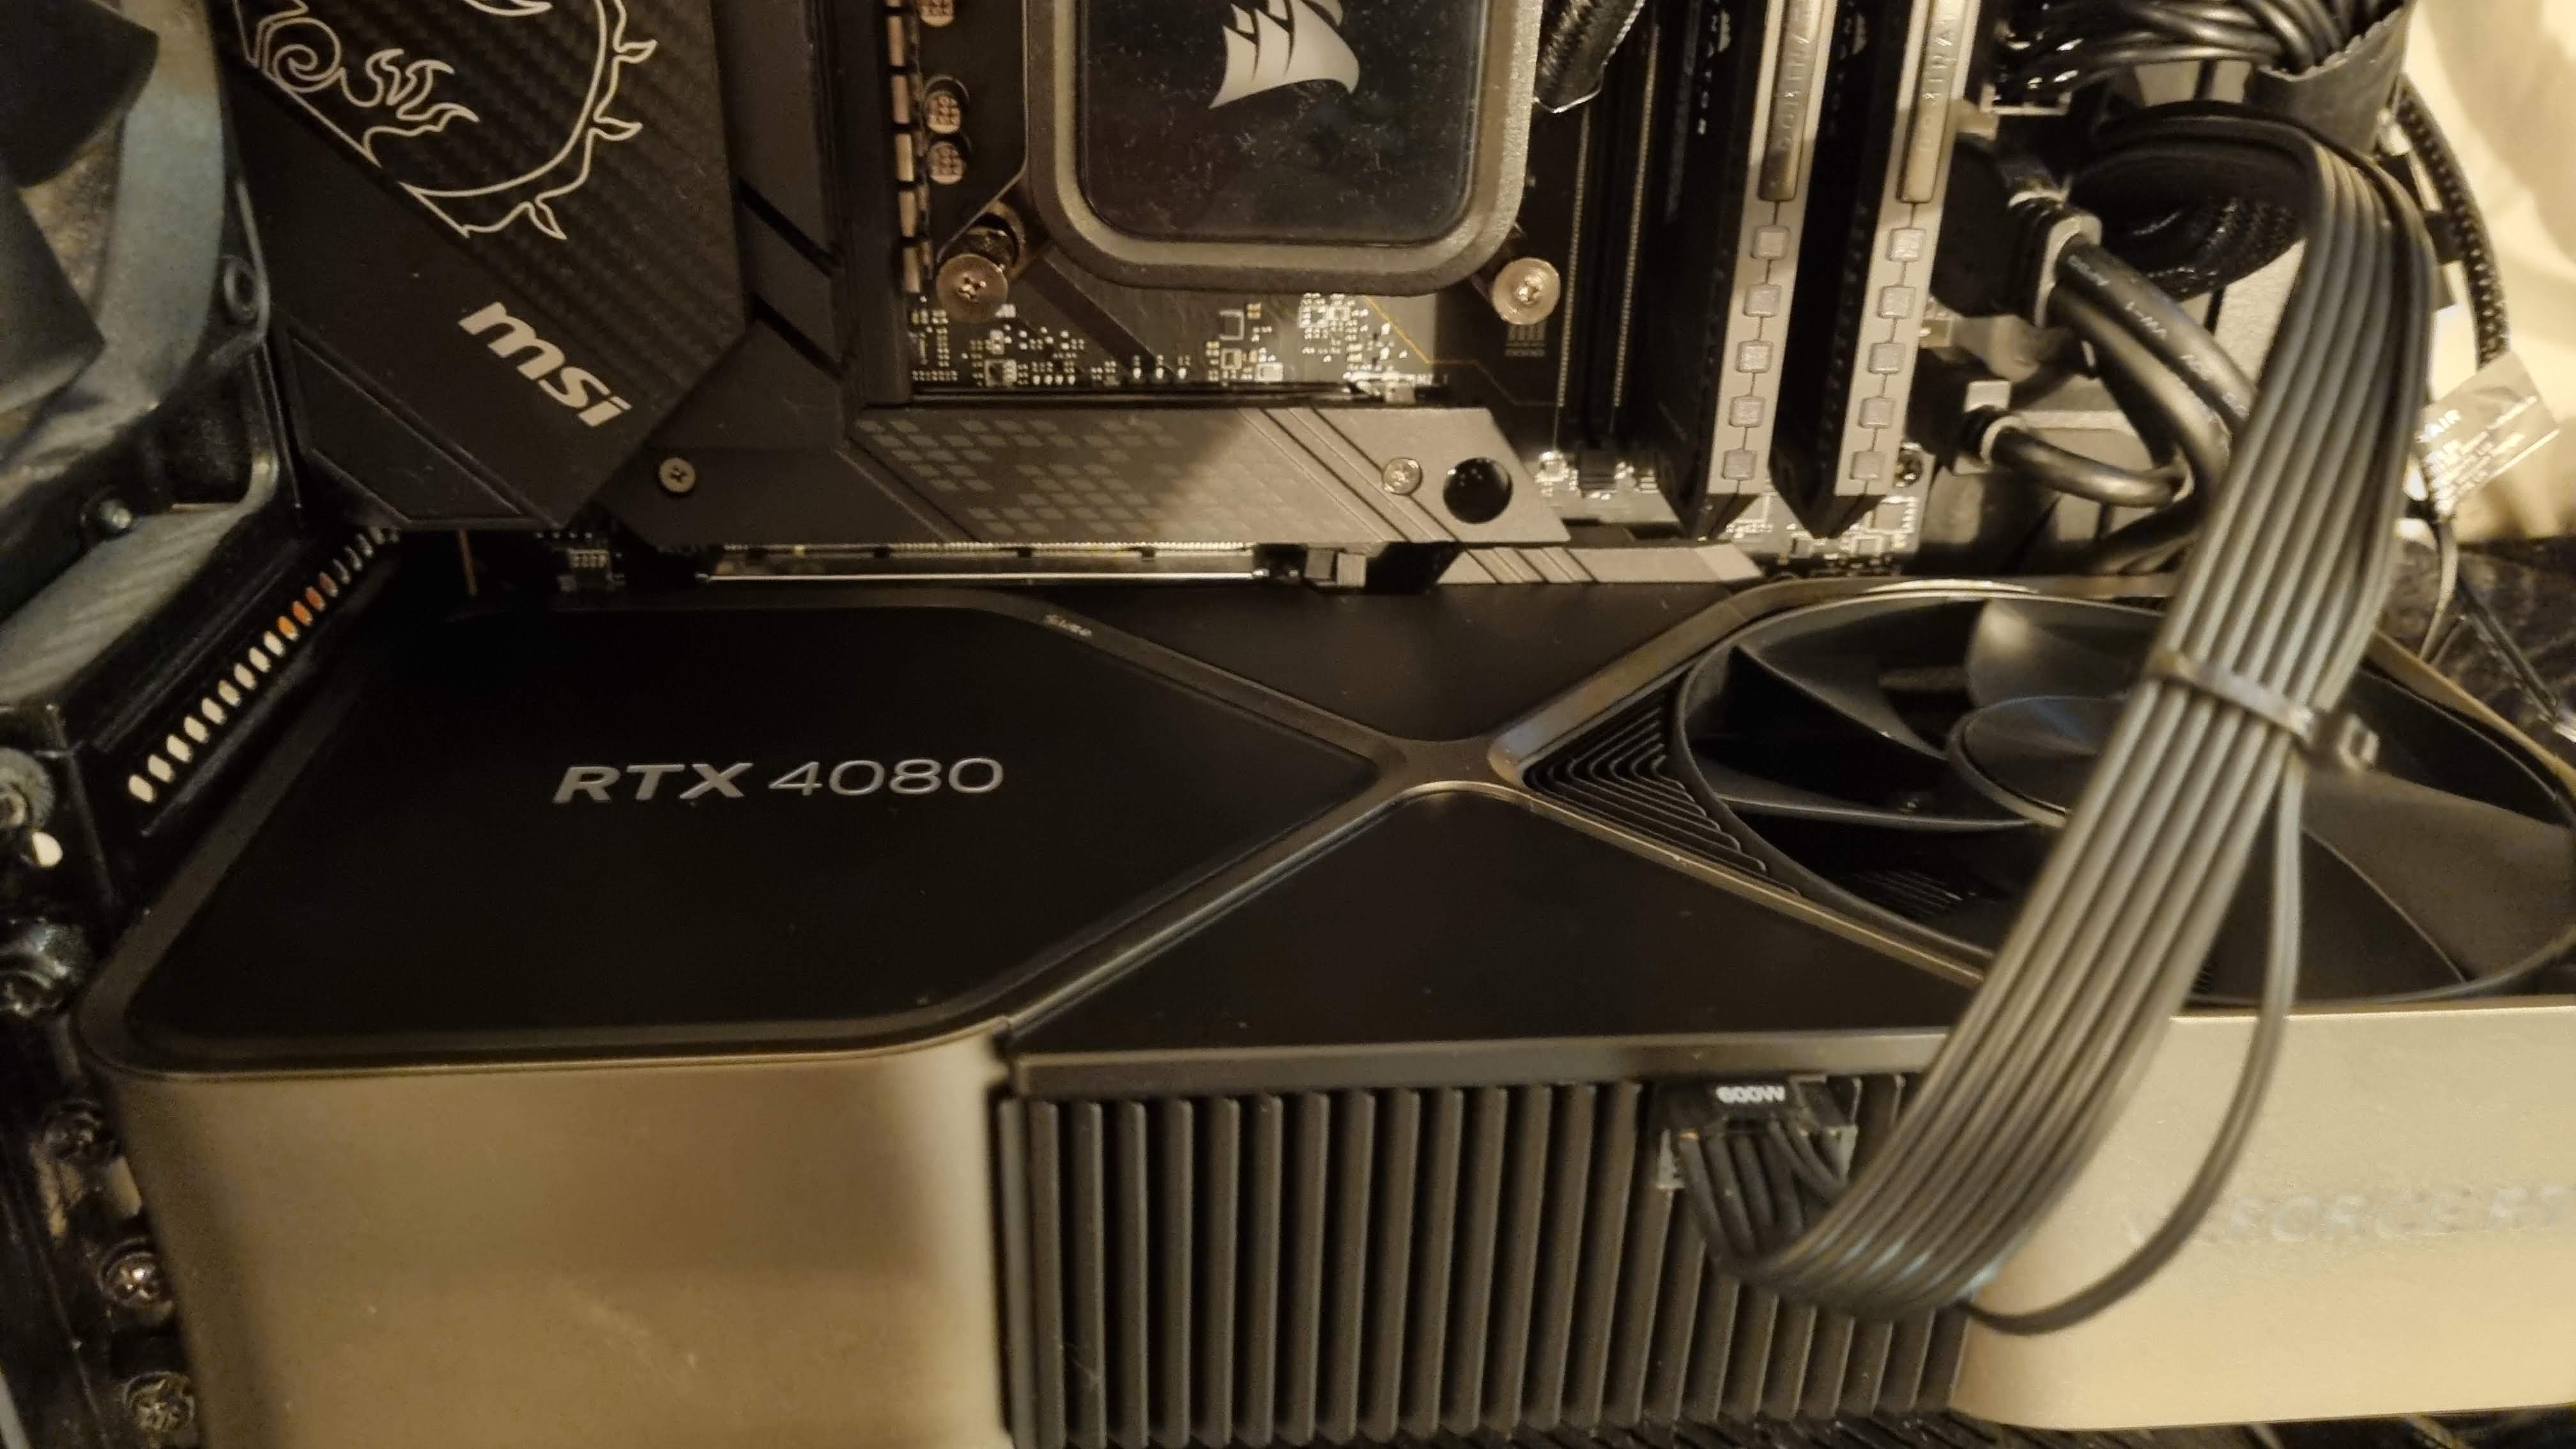 An RTX 4080 GPU is installed on the motherboard